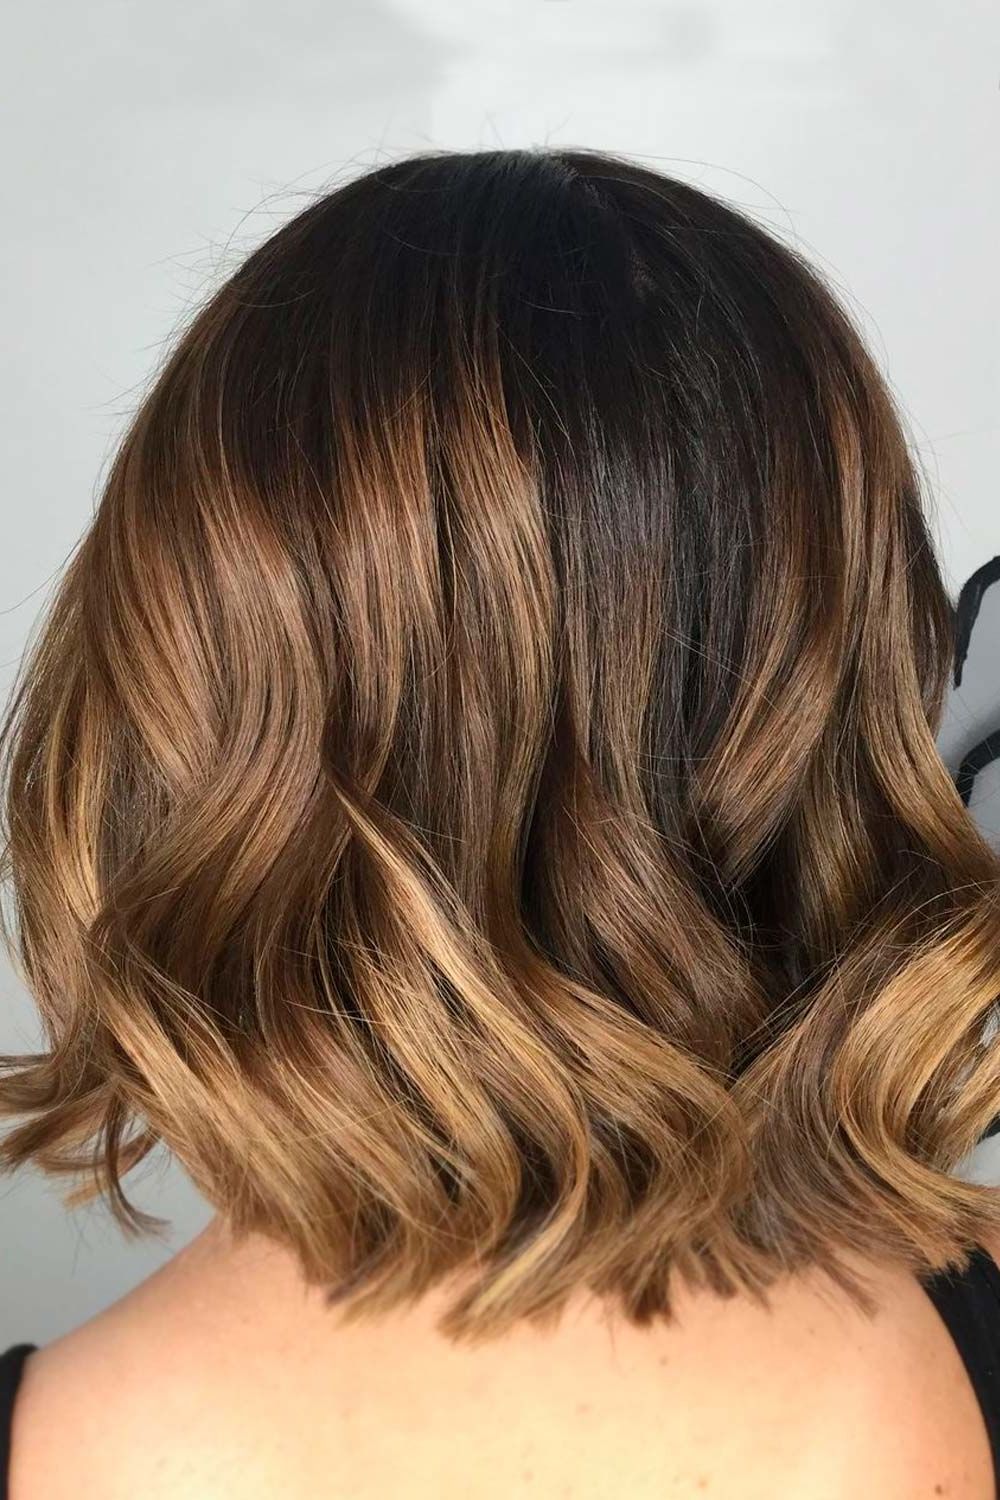 Untraditional Lob Haircut Ideas To Give A Try | Lovehairstyles For Latest Wavy Lob Haircuts With Caramel Highlights (View 10 of 25)